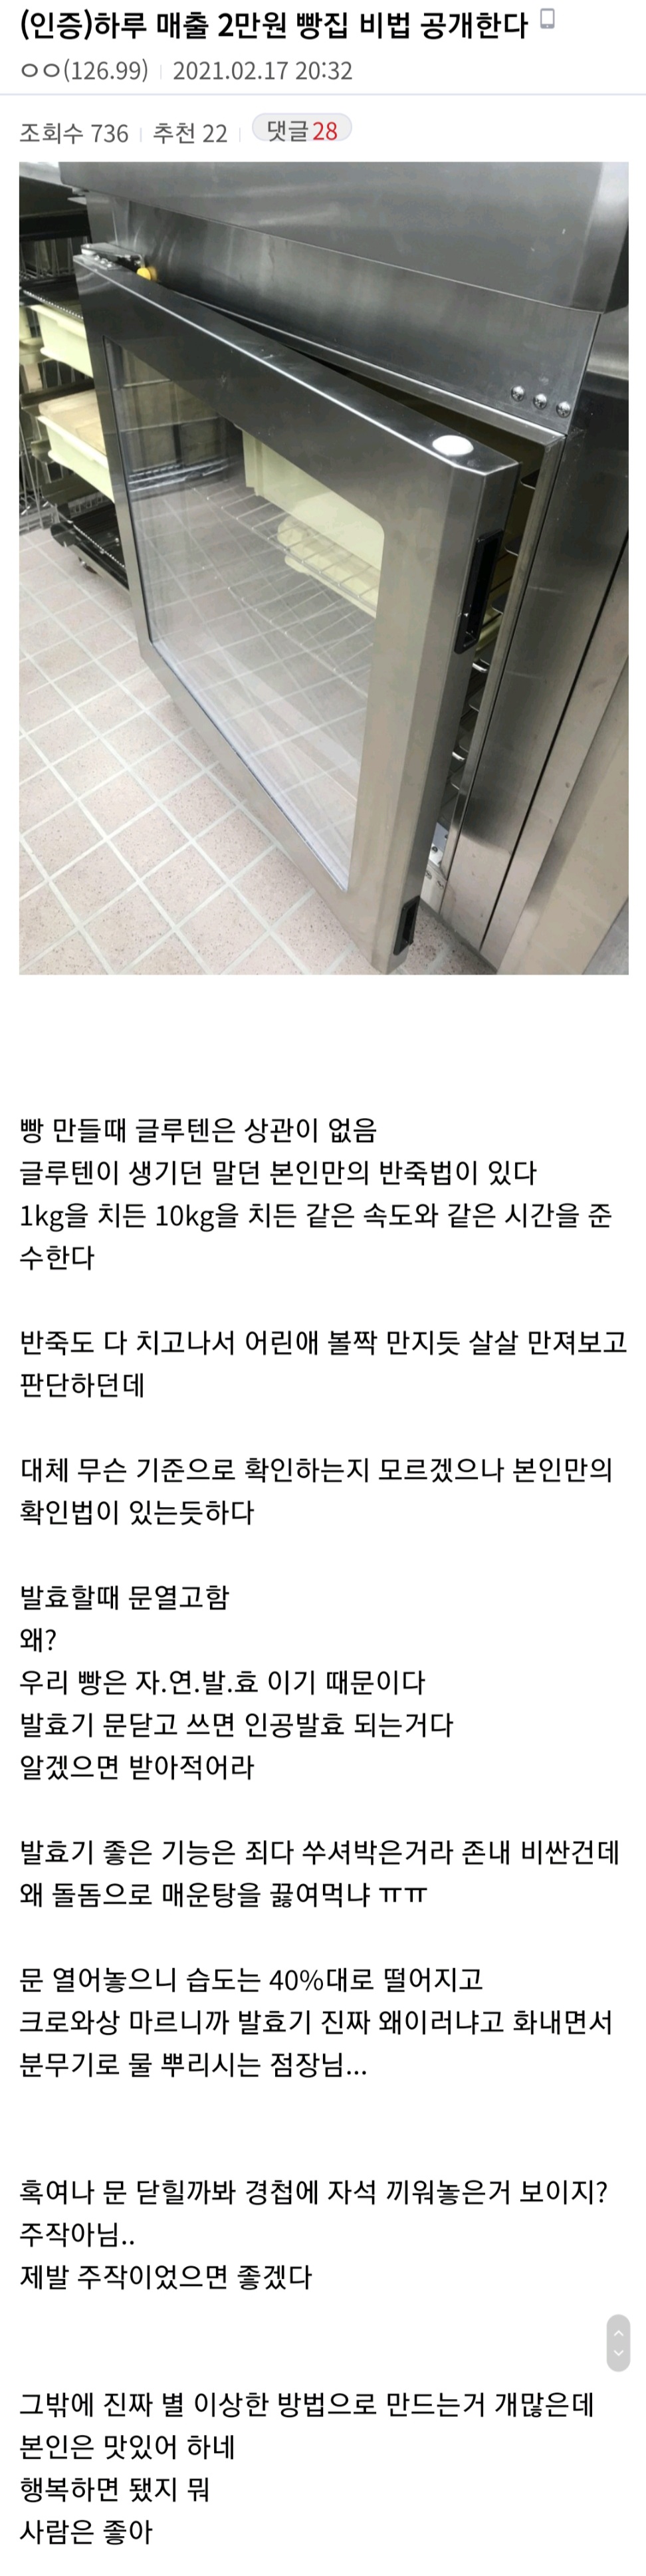 ○ Revealing secret recipe for bakery with daily sales of 20,000 won